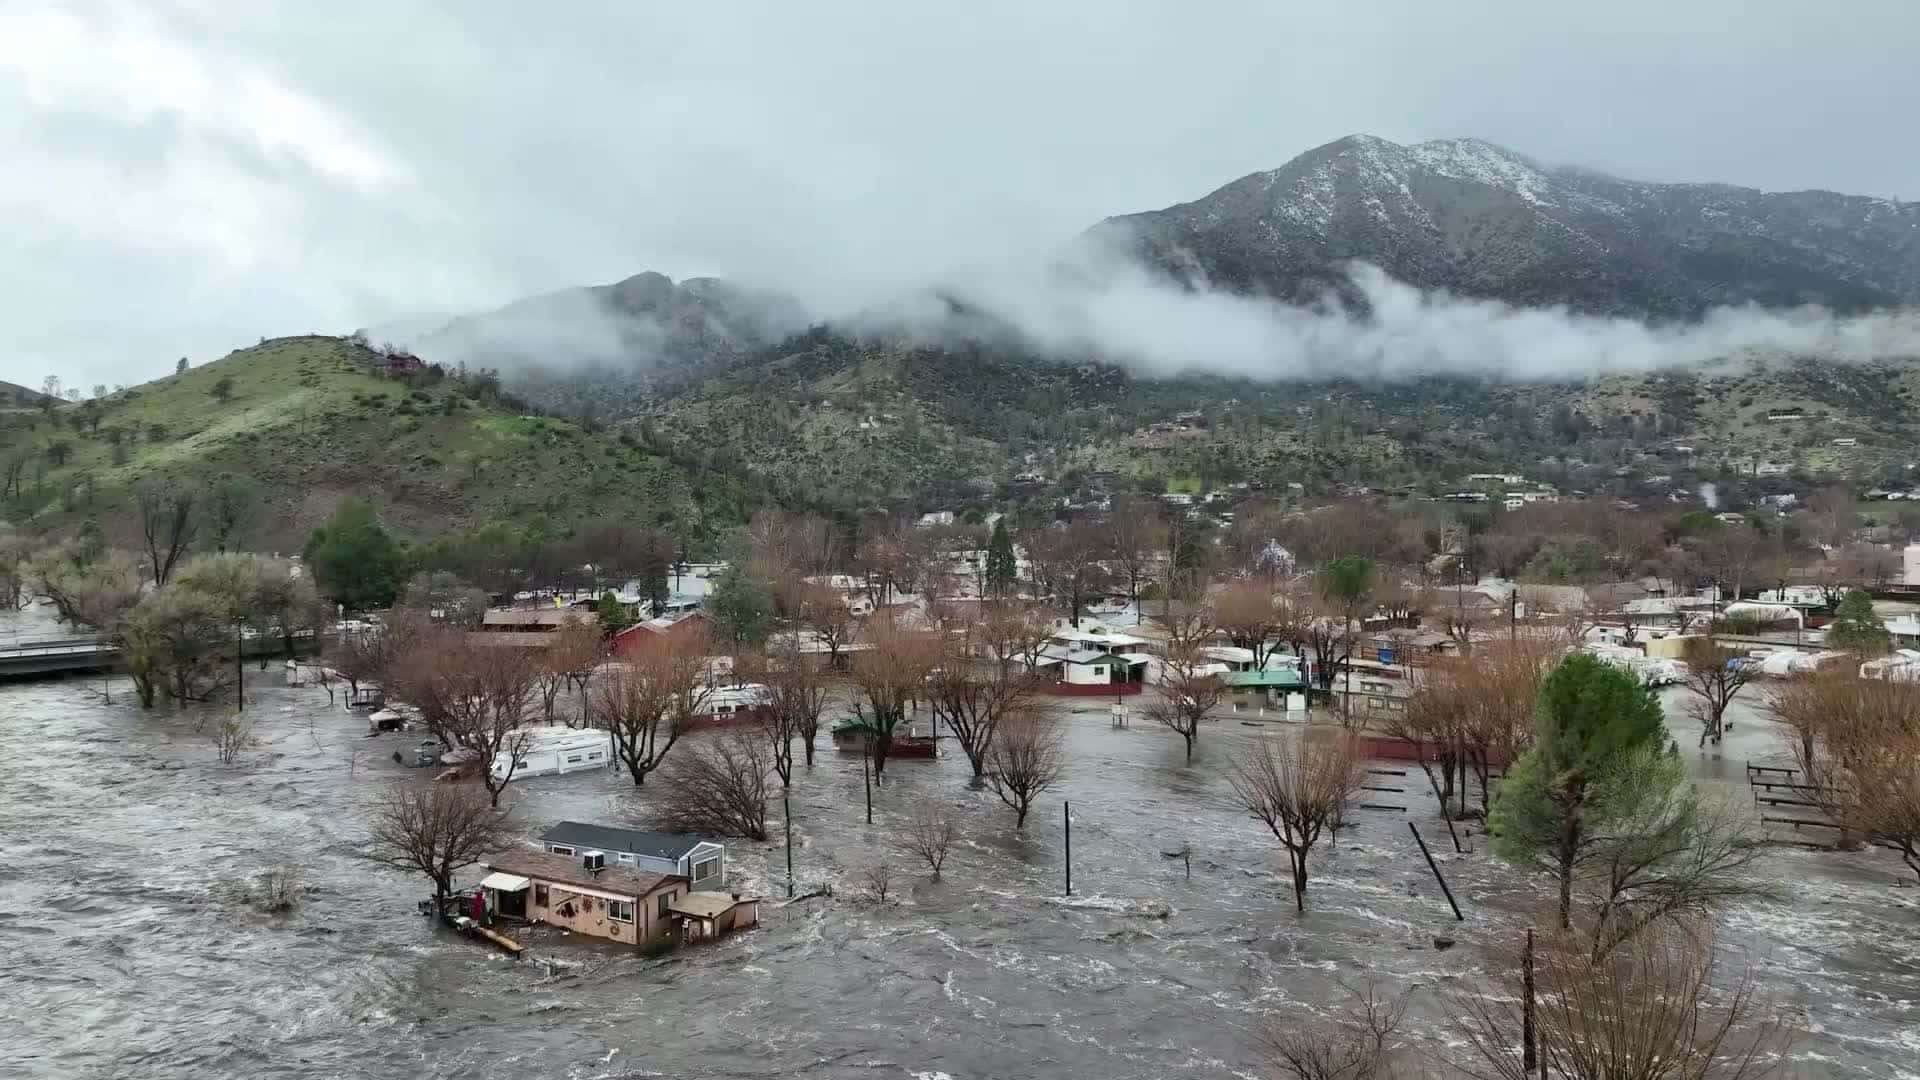 A Town Is Flooded With Water In The Middle Of Mountains